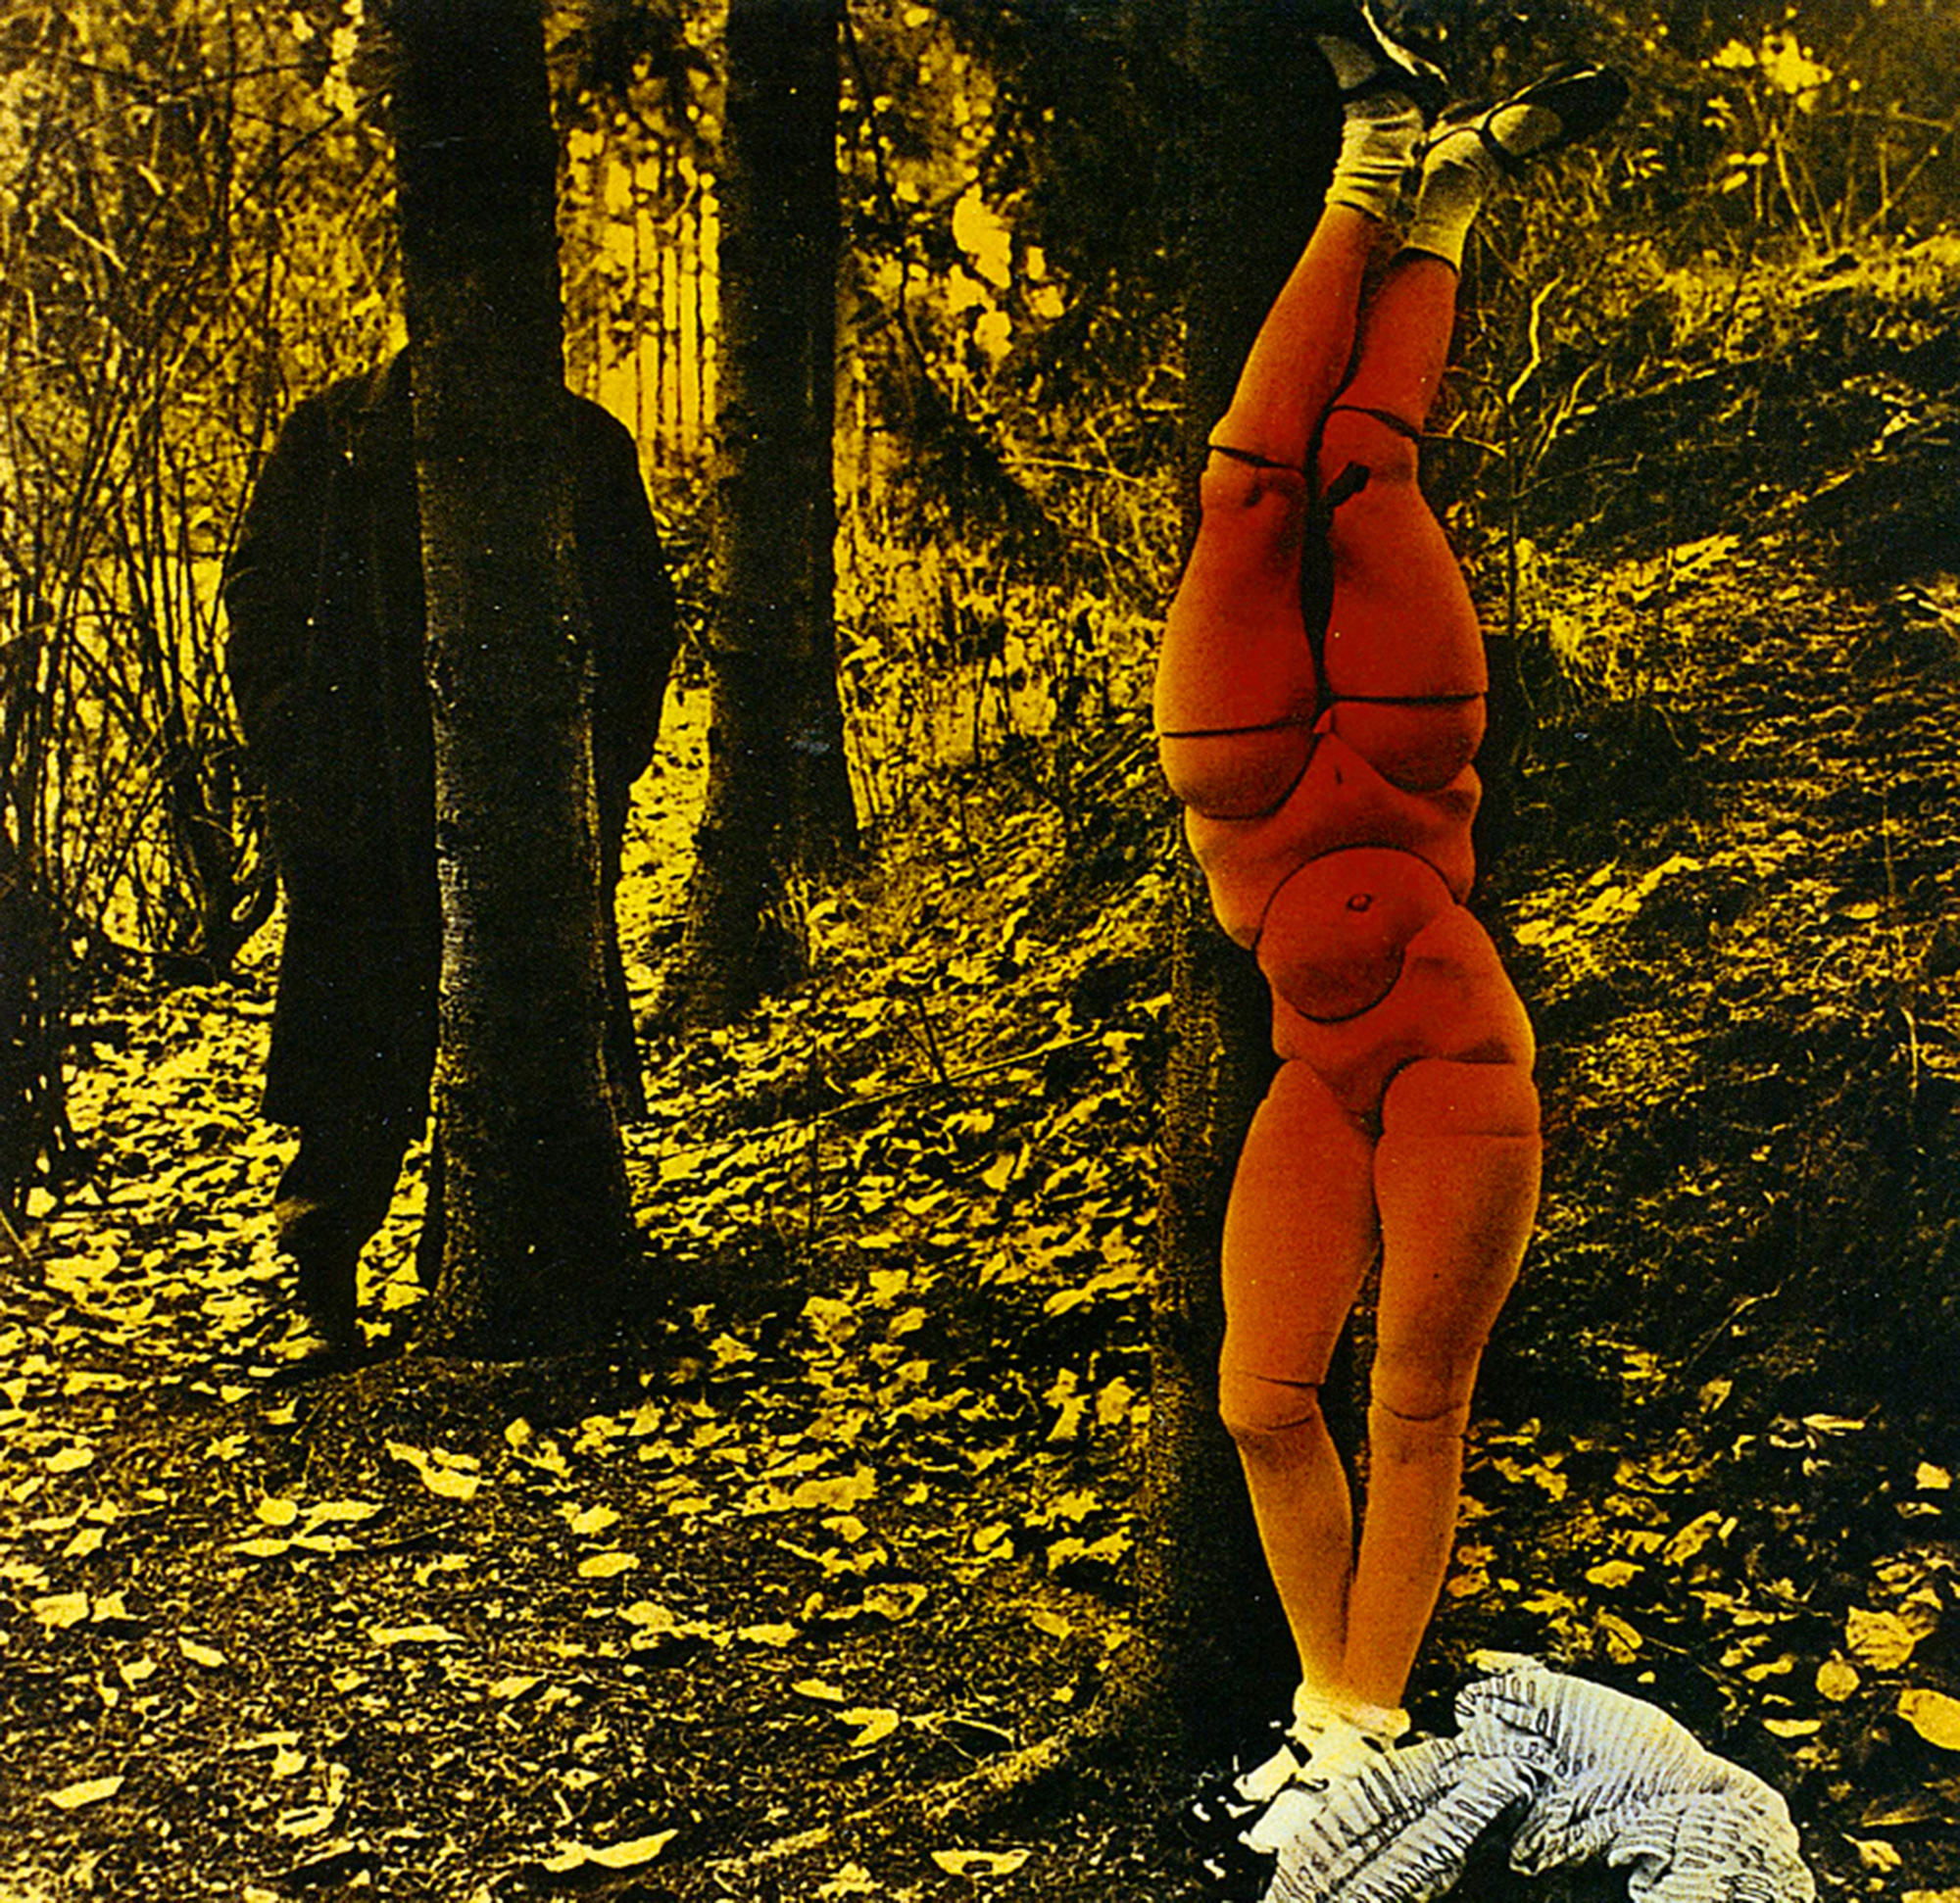 Hans Bellmer’s nineteen thirty five artwork titled “The Doll,” a photograph of a sculpture with four legs, conjoined waists, and no arms or heads. Behind a tree, another figure lurks. 